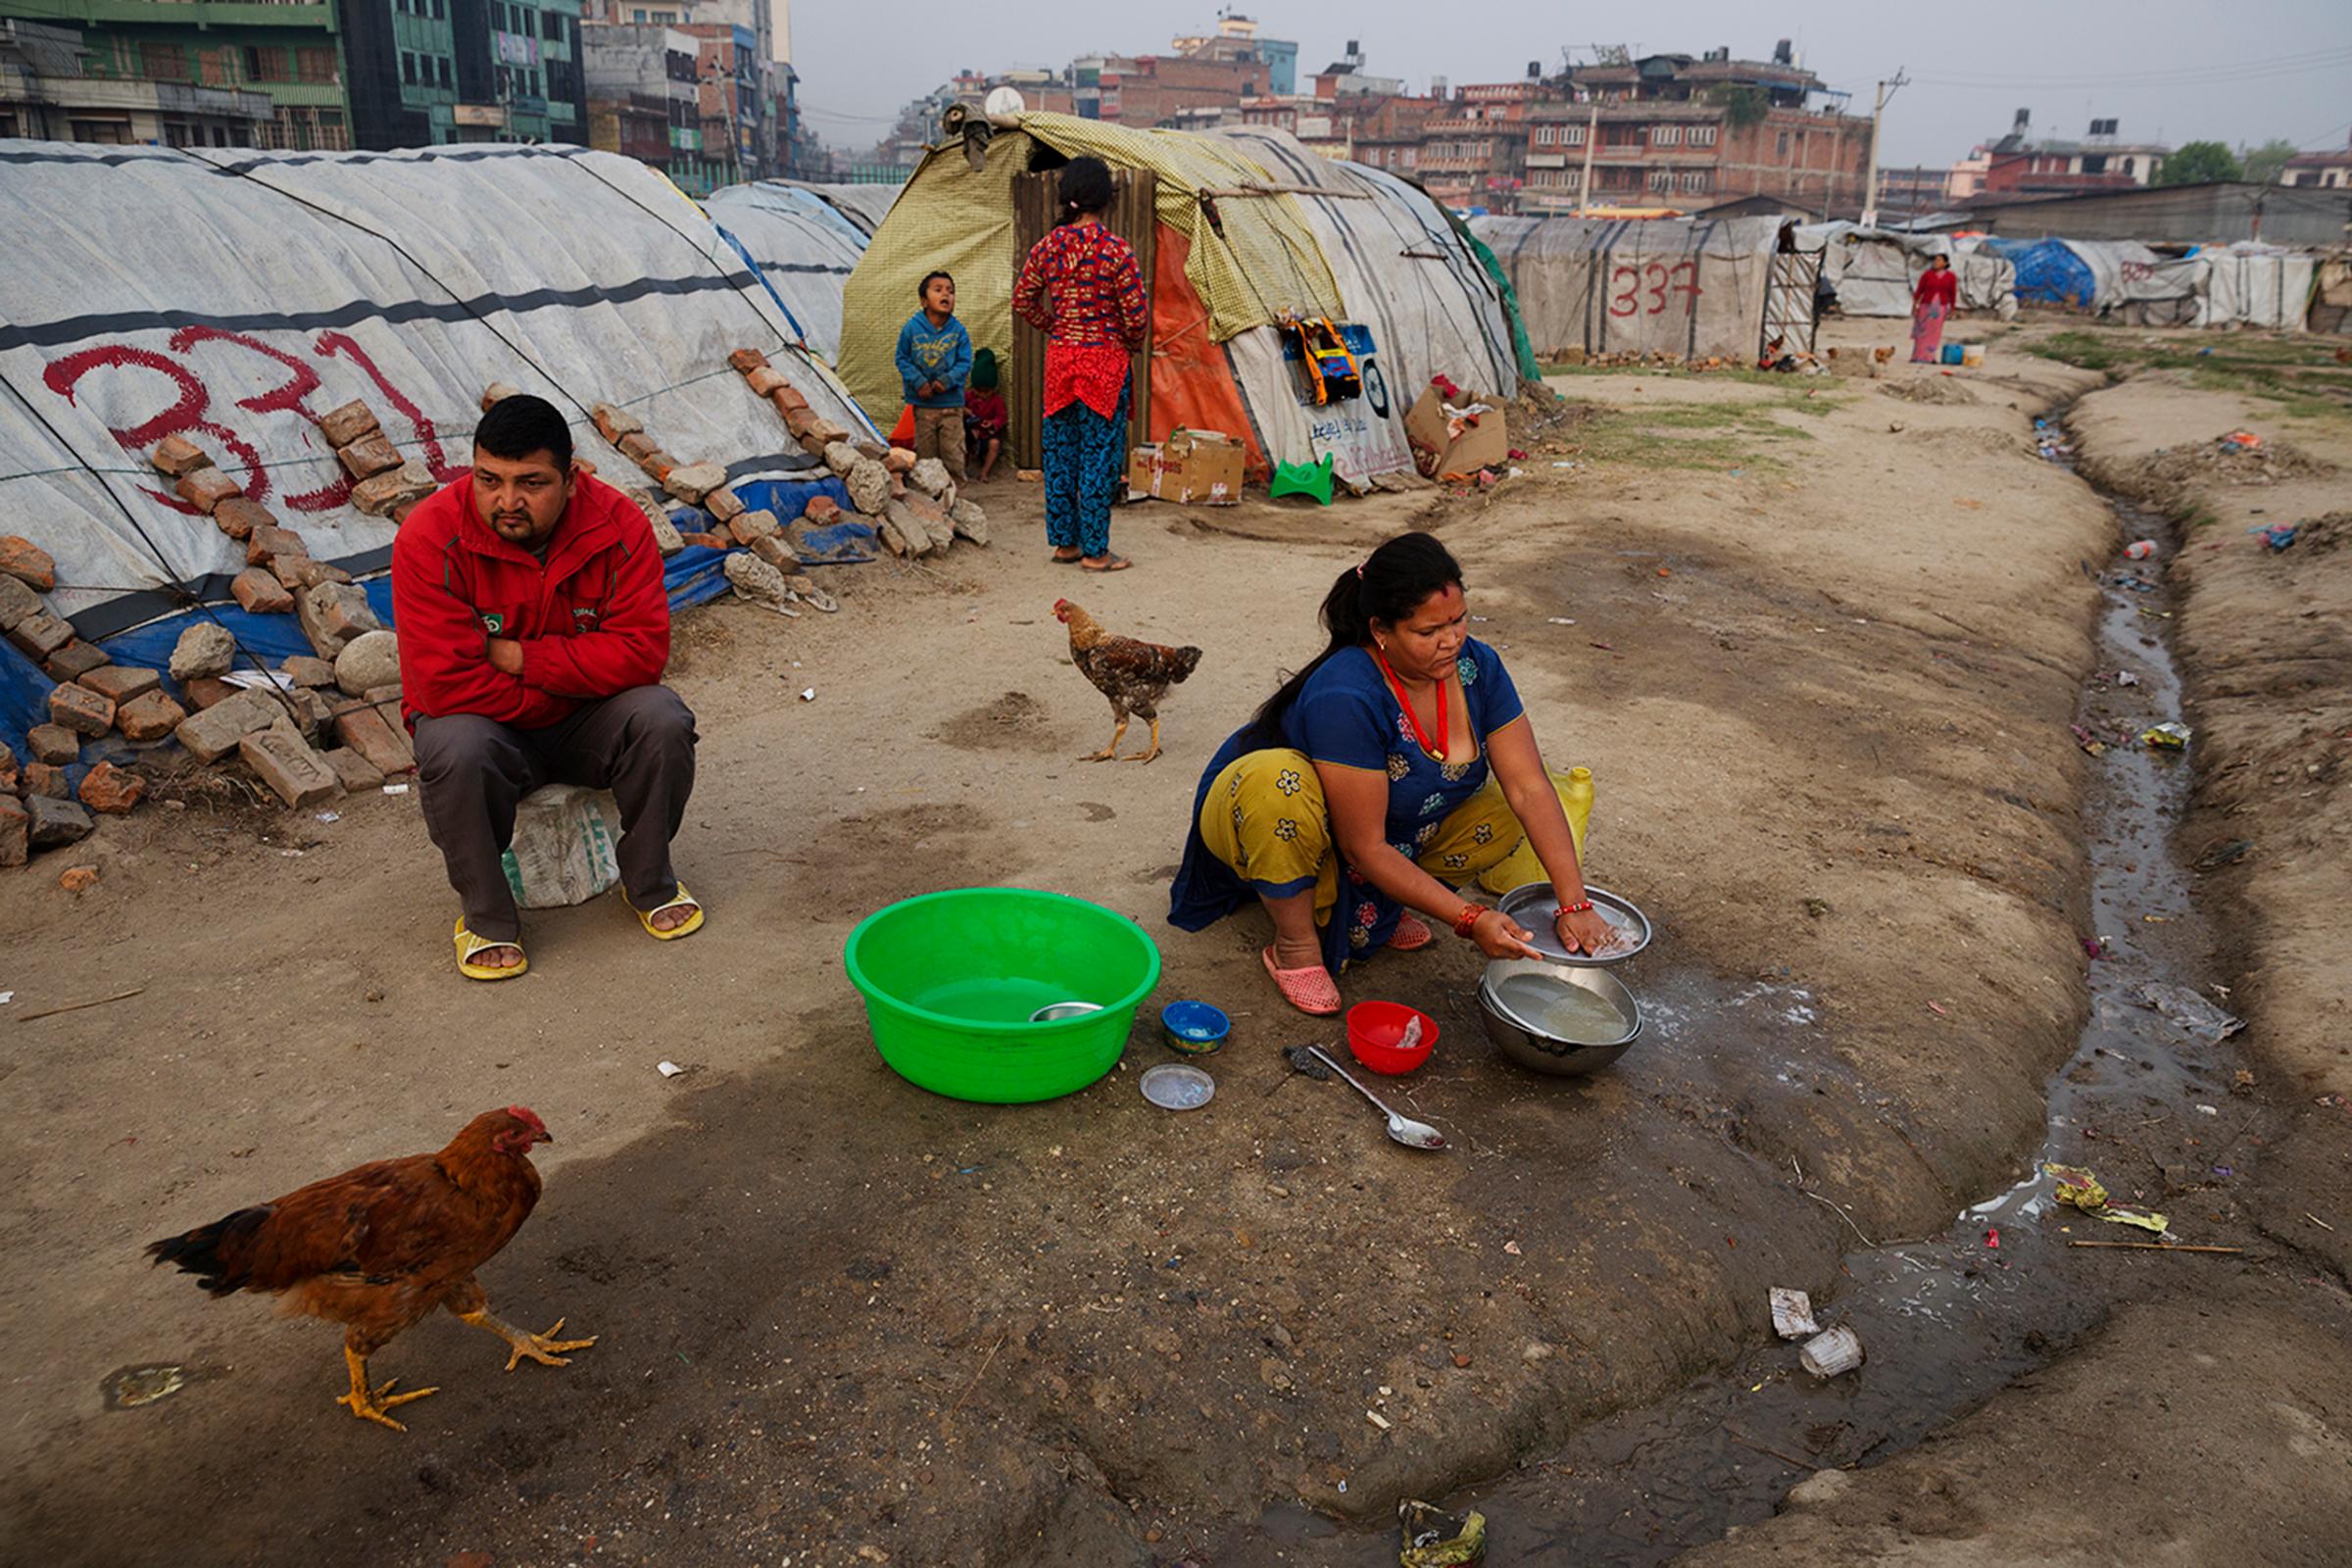 A family sits in an Informal tent encampment in central Kathmandu, Nepal. Approaching the first anniversary of the quakes of 2015, many people have been living in the squalid conditions of the camp for the past year. Some residents of the camp are from towns and villages in the region of Kathmandu, while others, some of whom are Nepalese migrant workers, are from more distant areas, March 31, 2016.